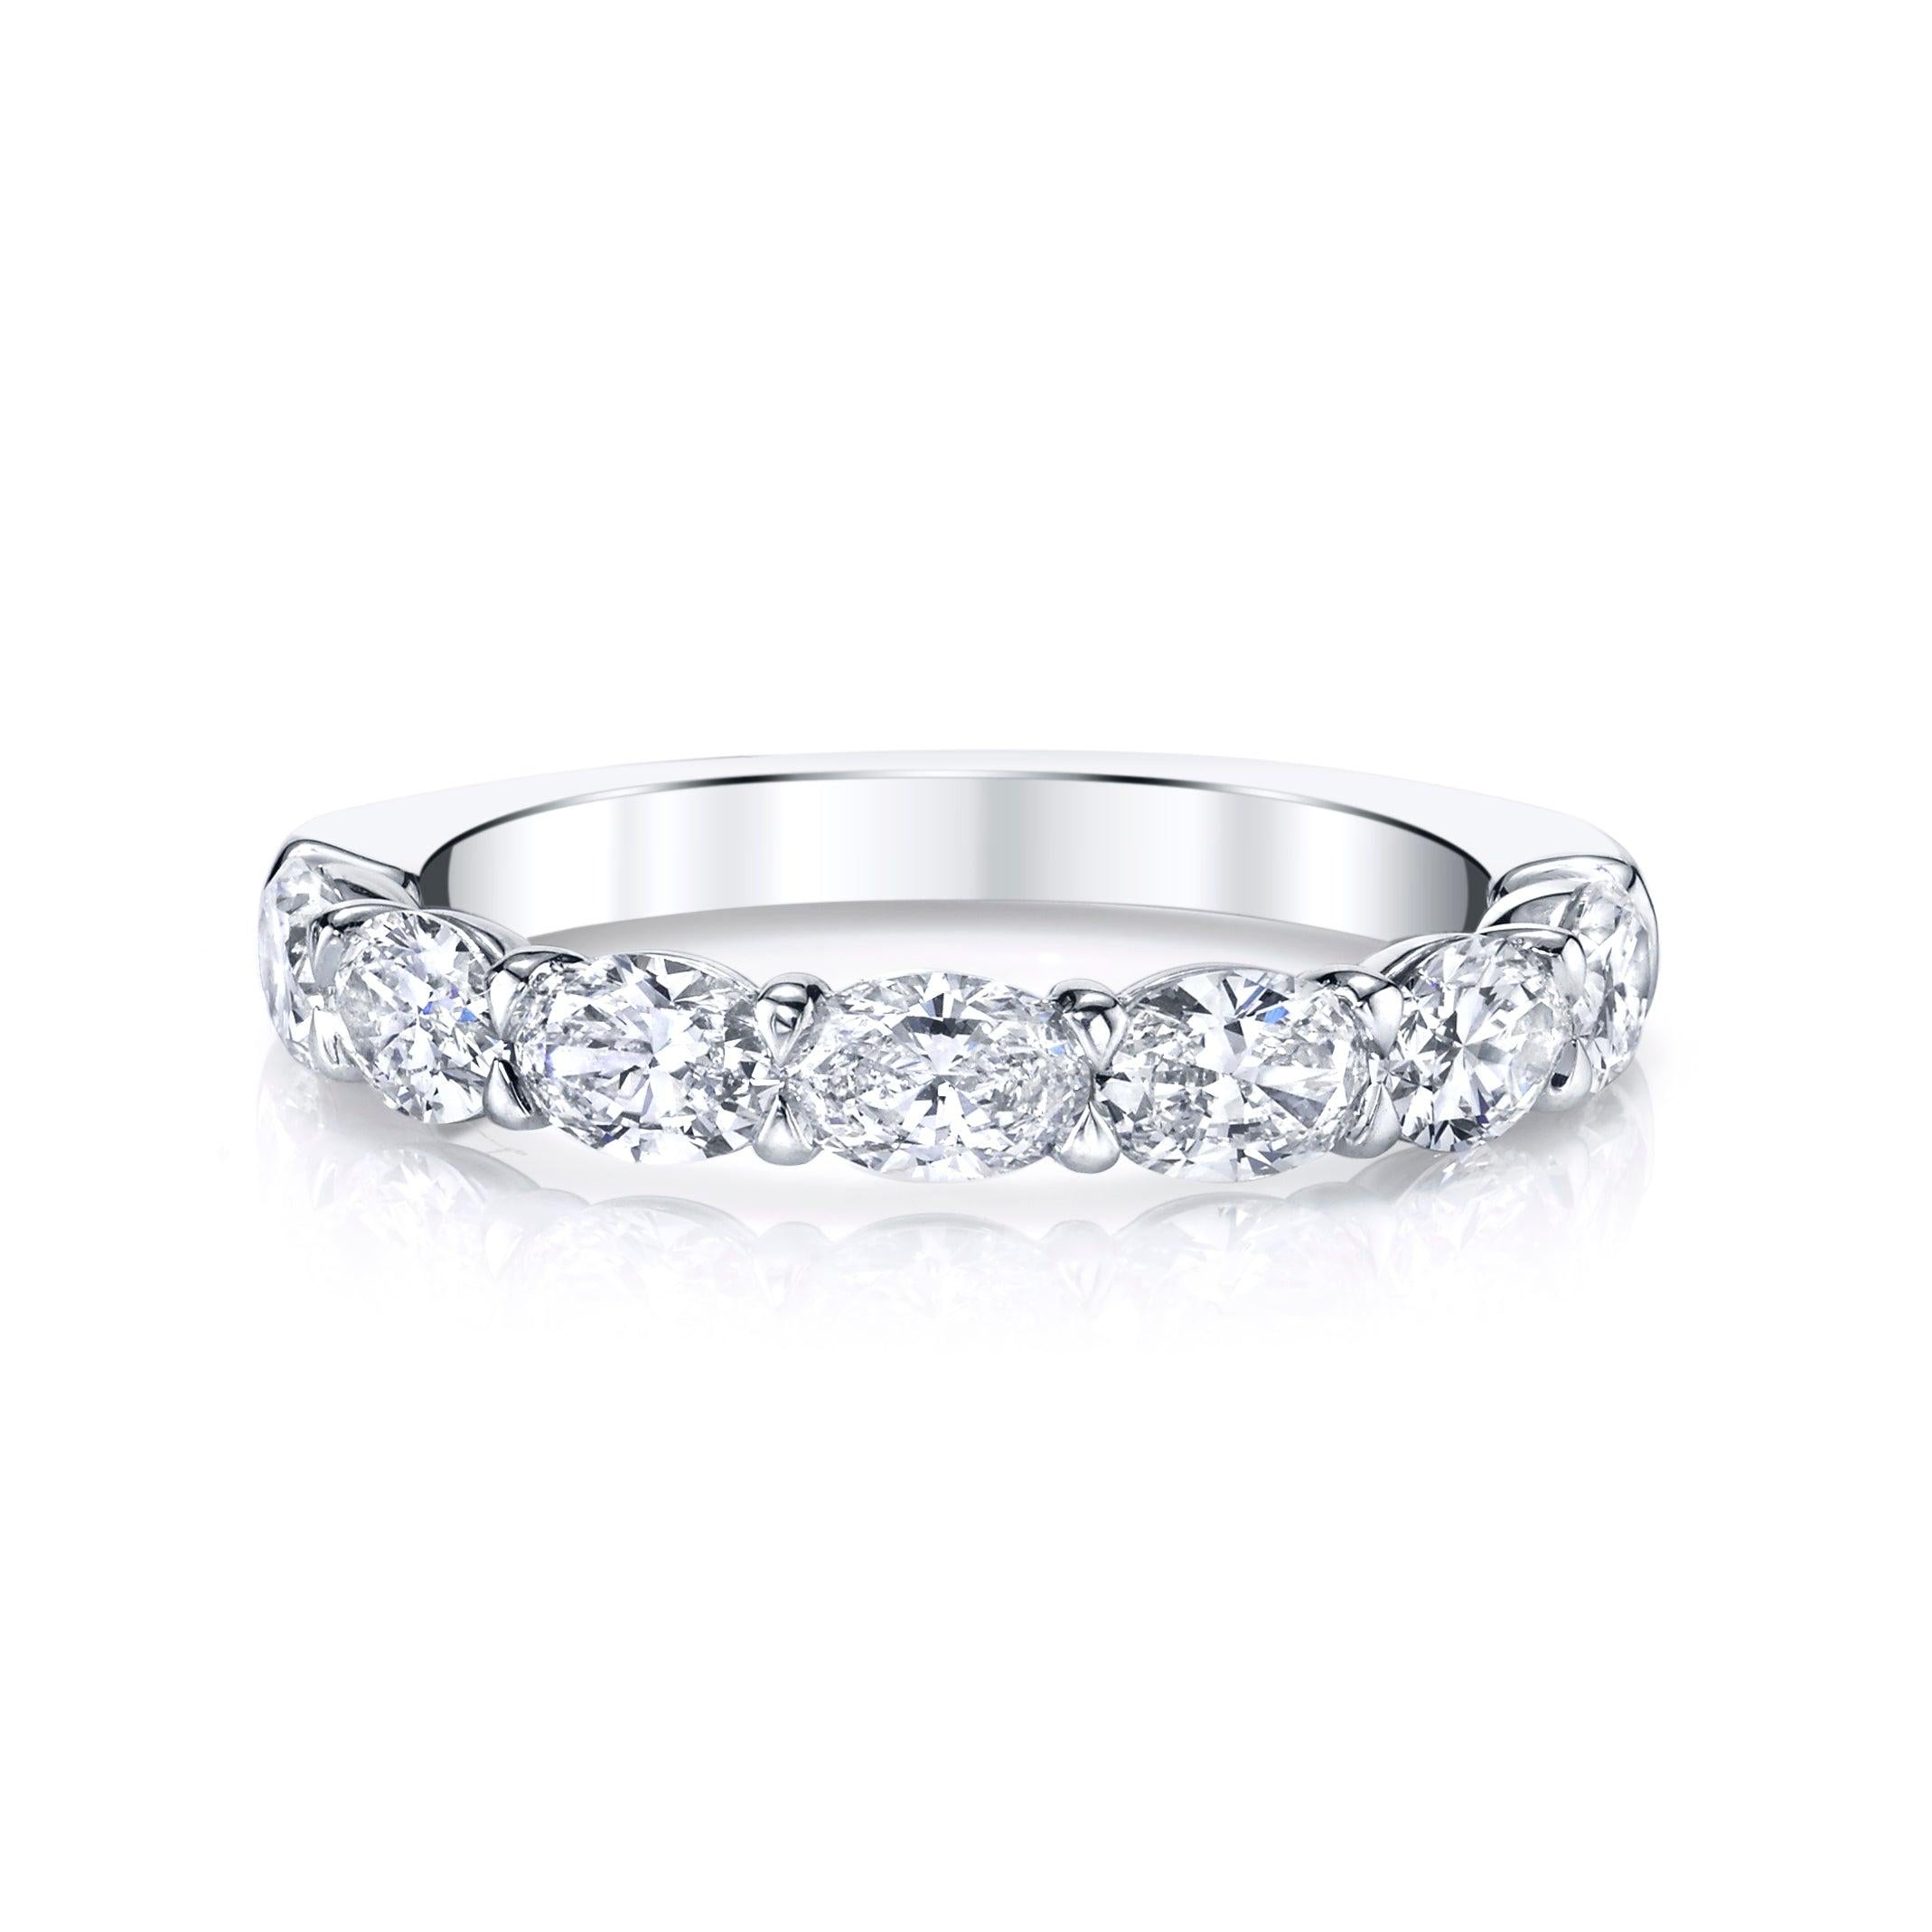 
This exquisite eternity band flaunts seven horizontally set dazzling oval-cut diamonds.
It is crafted from platinum, this ring is currently a size 6.

Oval Diamond Cut Eternity Band.
Diamonds: 1.37ct G/H SI Oval cut Diamonds.
Diamonds set